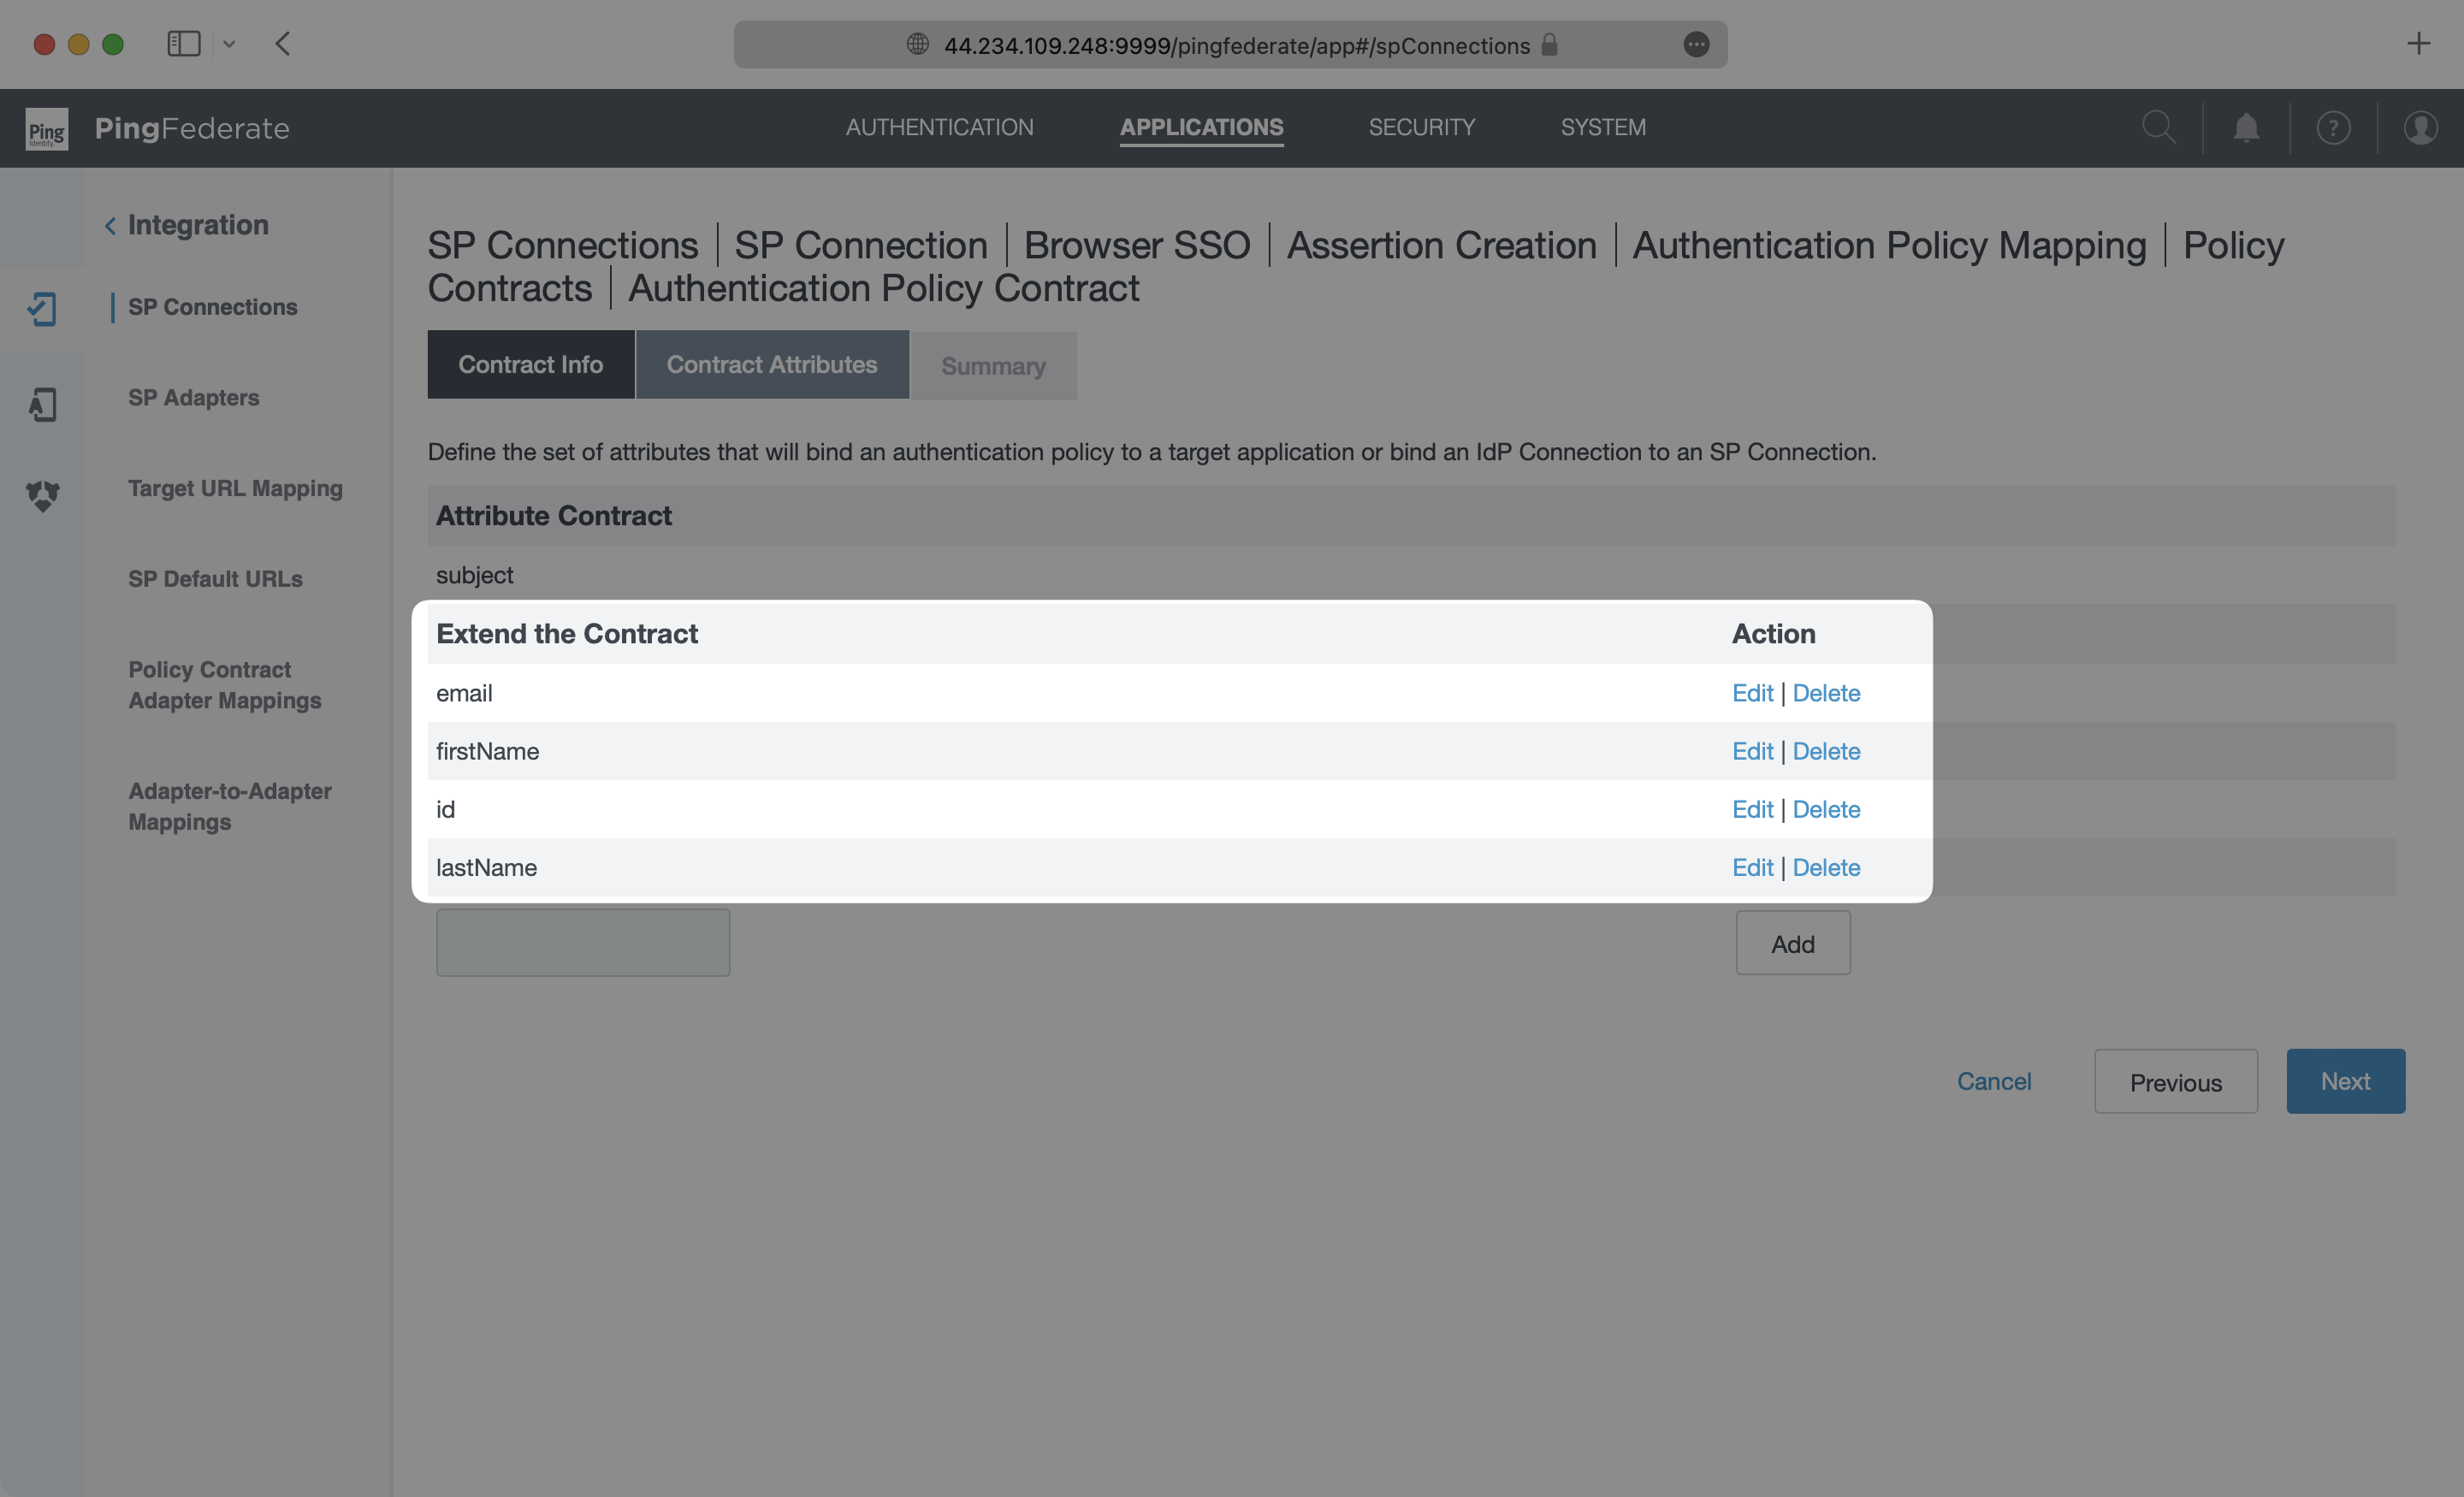 A screenshot showing where to extend the Authentication Policy Contract in PingFederate.